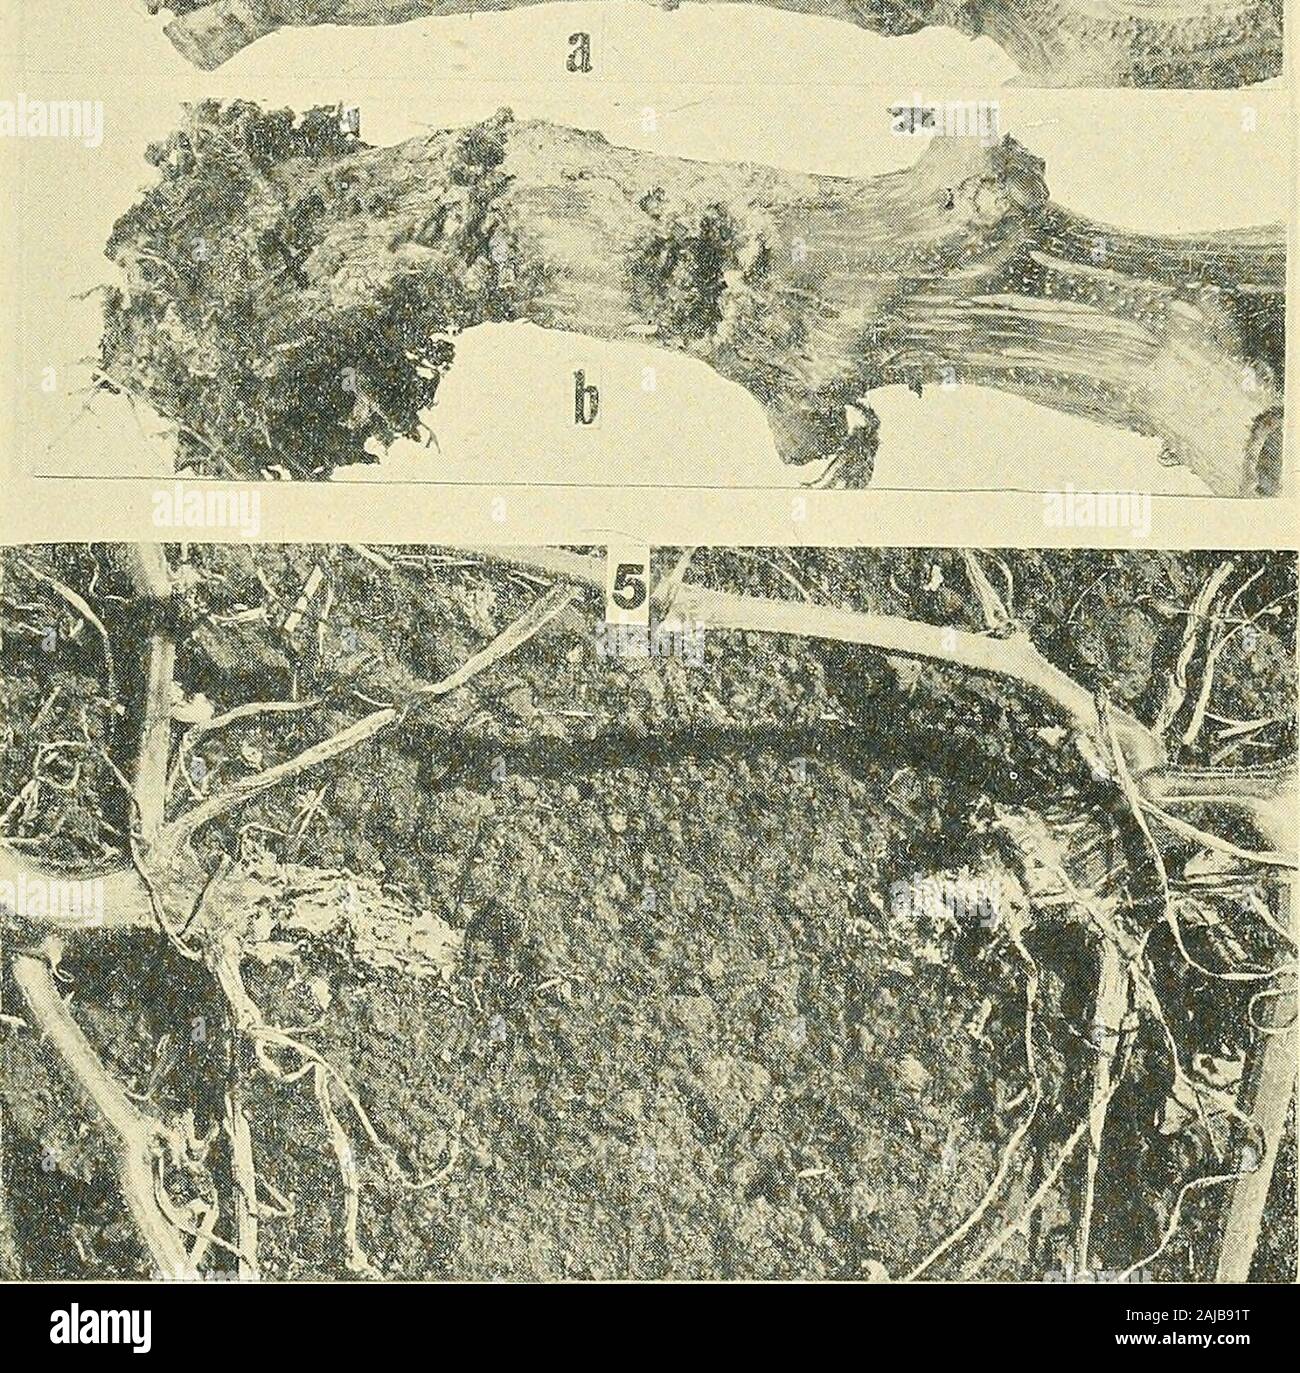 Annual report . Fig. 2. Photomicrograph of squash vine borer eggs, x 24 Coiiginal). Fig. 3. Newly hatched squash vine borer larva. Photomicrograph, x 13 foriginal). Fig. 4. a. Healthy squash stem. 6. Badly infested squash stem. Note burrows atX. rPhoto by R. L. Coffin.)Fig. 5. Center of badly infested hill of squash. Note shredded condition of the bases of the stems. (Photo by R. L. Coffin.) 73 reduced, however, if not lost entirely in dry portions of the field or in dry years,or when fertilization of a naturally poor soil has been confined to the hill, as is sooften the case. In the case of s Stock Photo